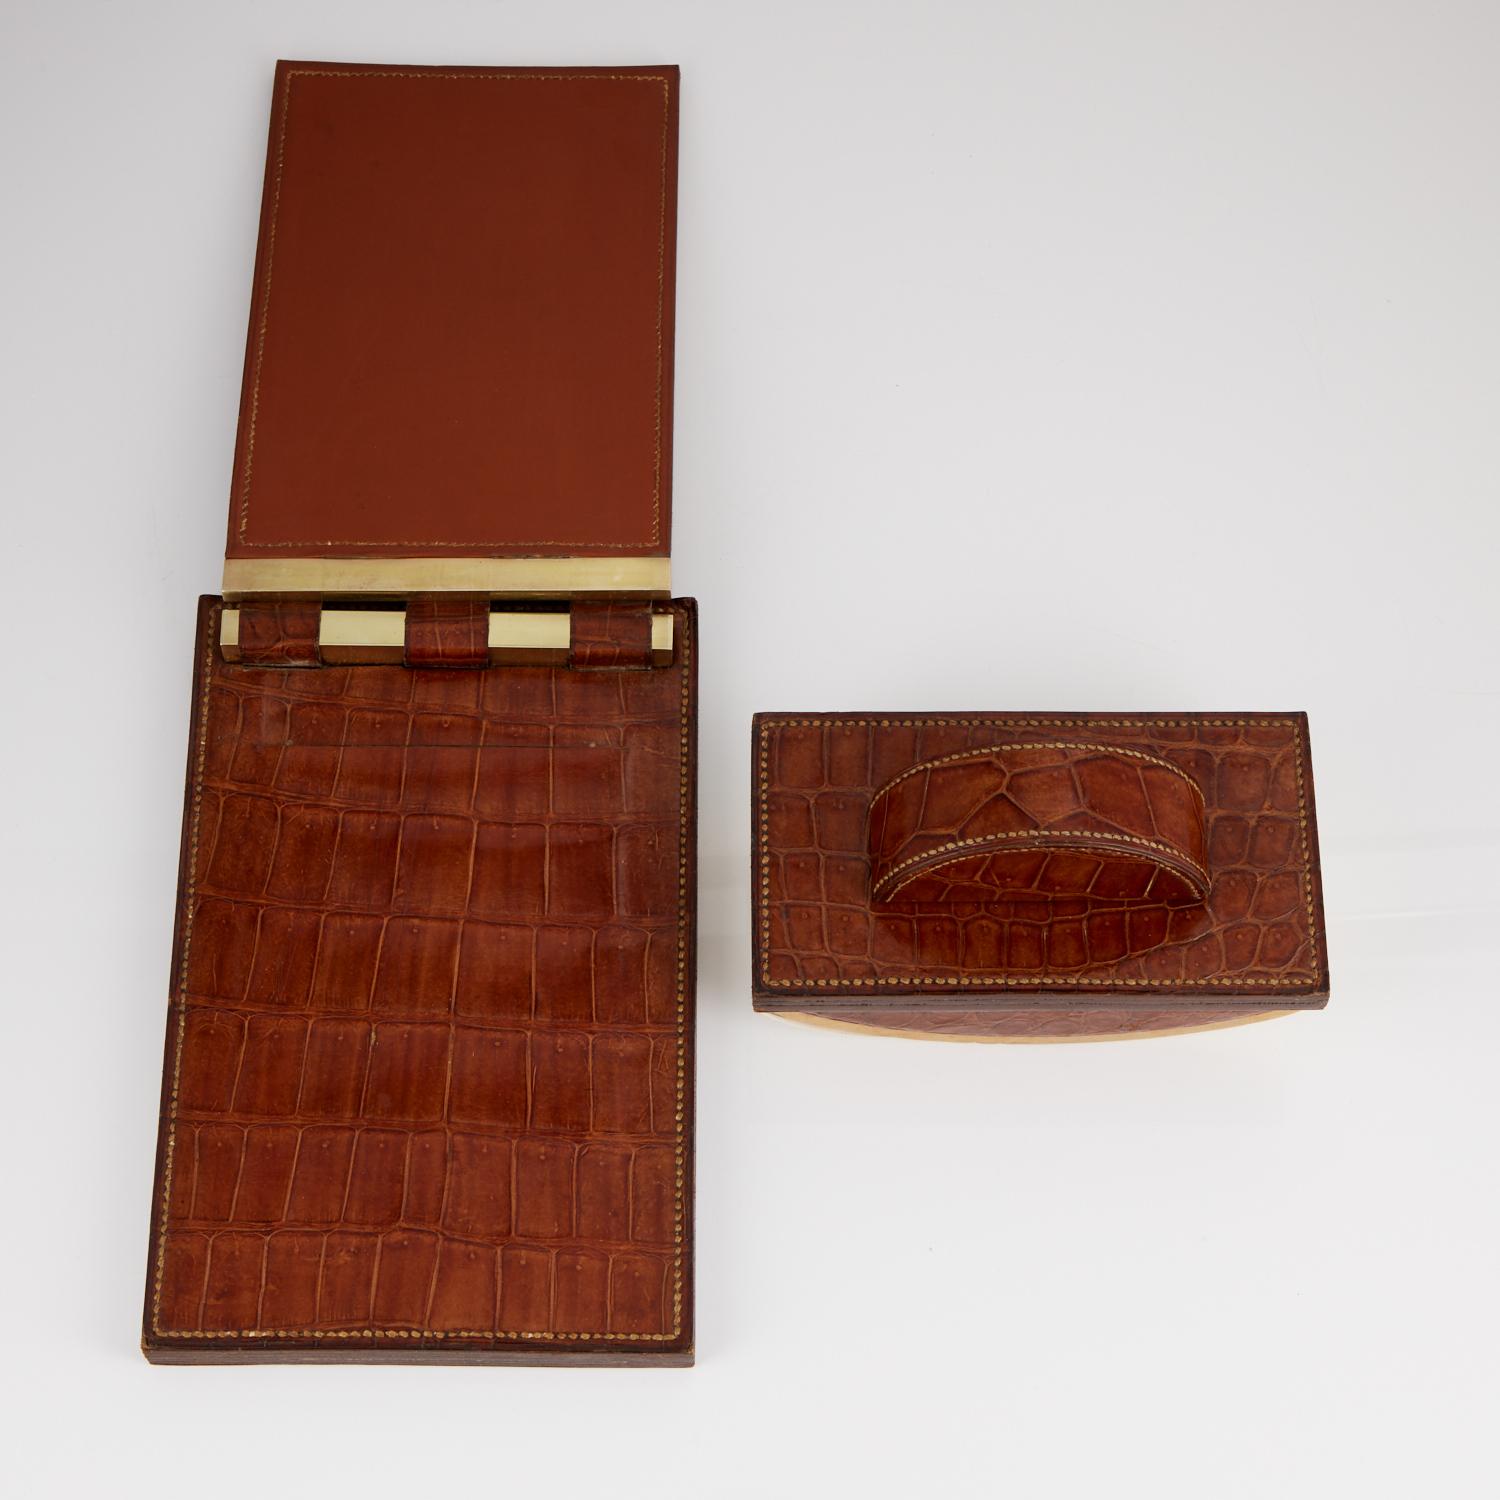 Two beautiful and desirable vintage desk pieces by the most famous luxury brand, the crocodile skin still has its original sheen and is in very good condition.

Both pieces have stitching on the outer edges.

Measures: Blotter W 7 1/4” x H 4” x